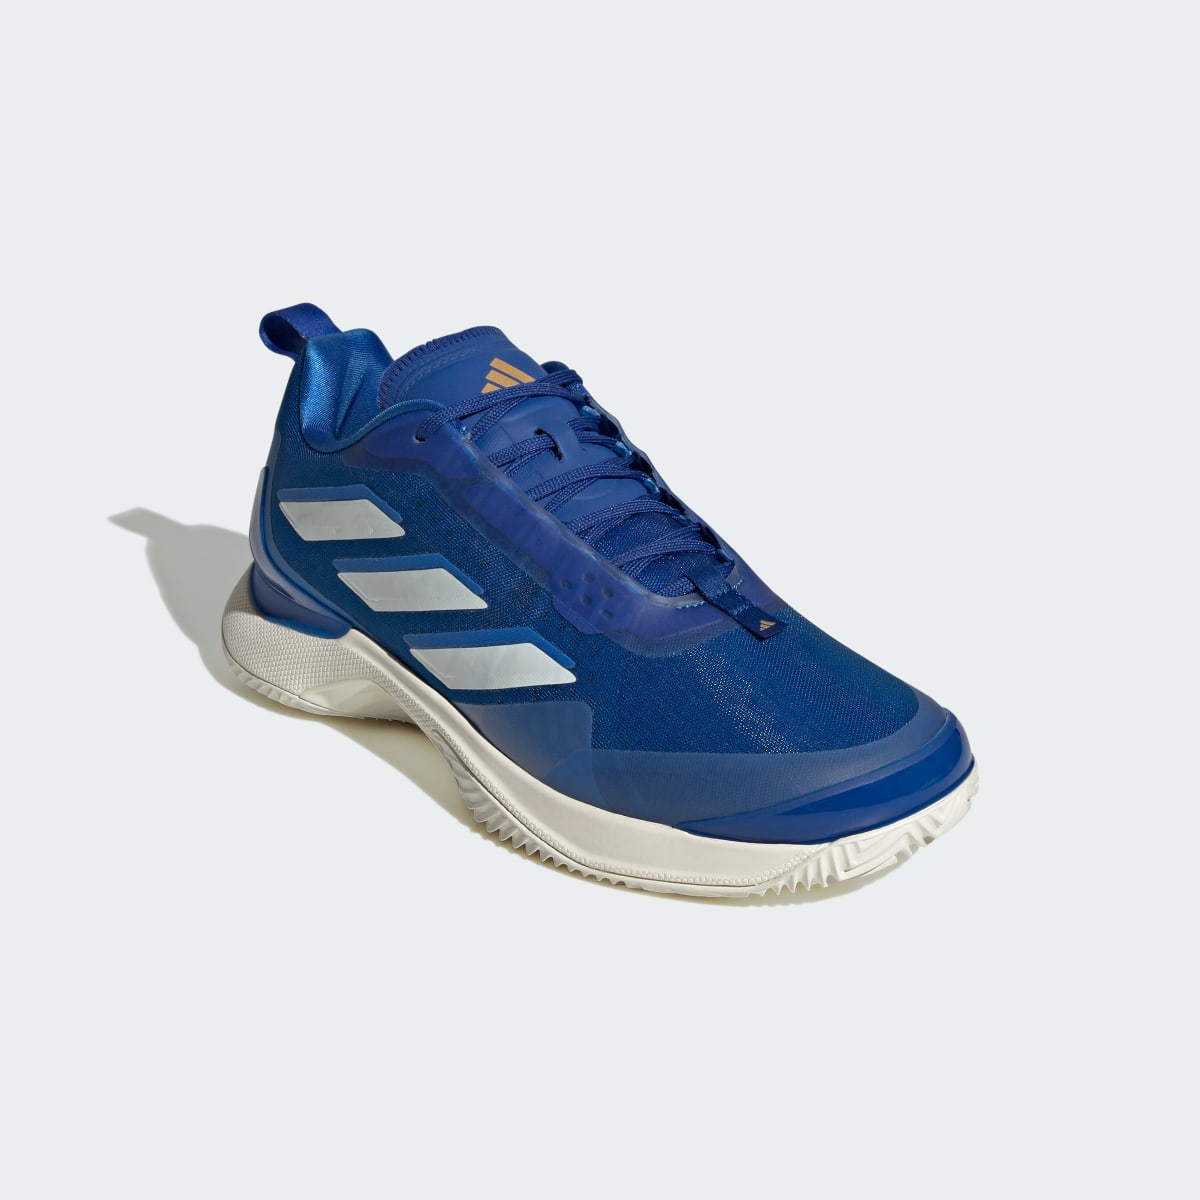 Adidas Avacourt Clay Court Tennis Shoes. 5